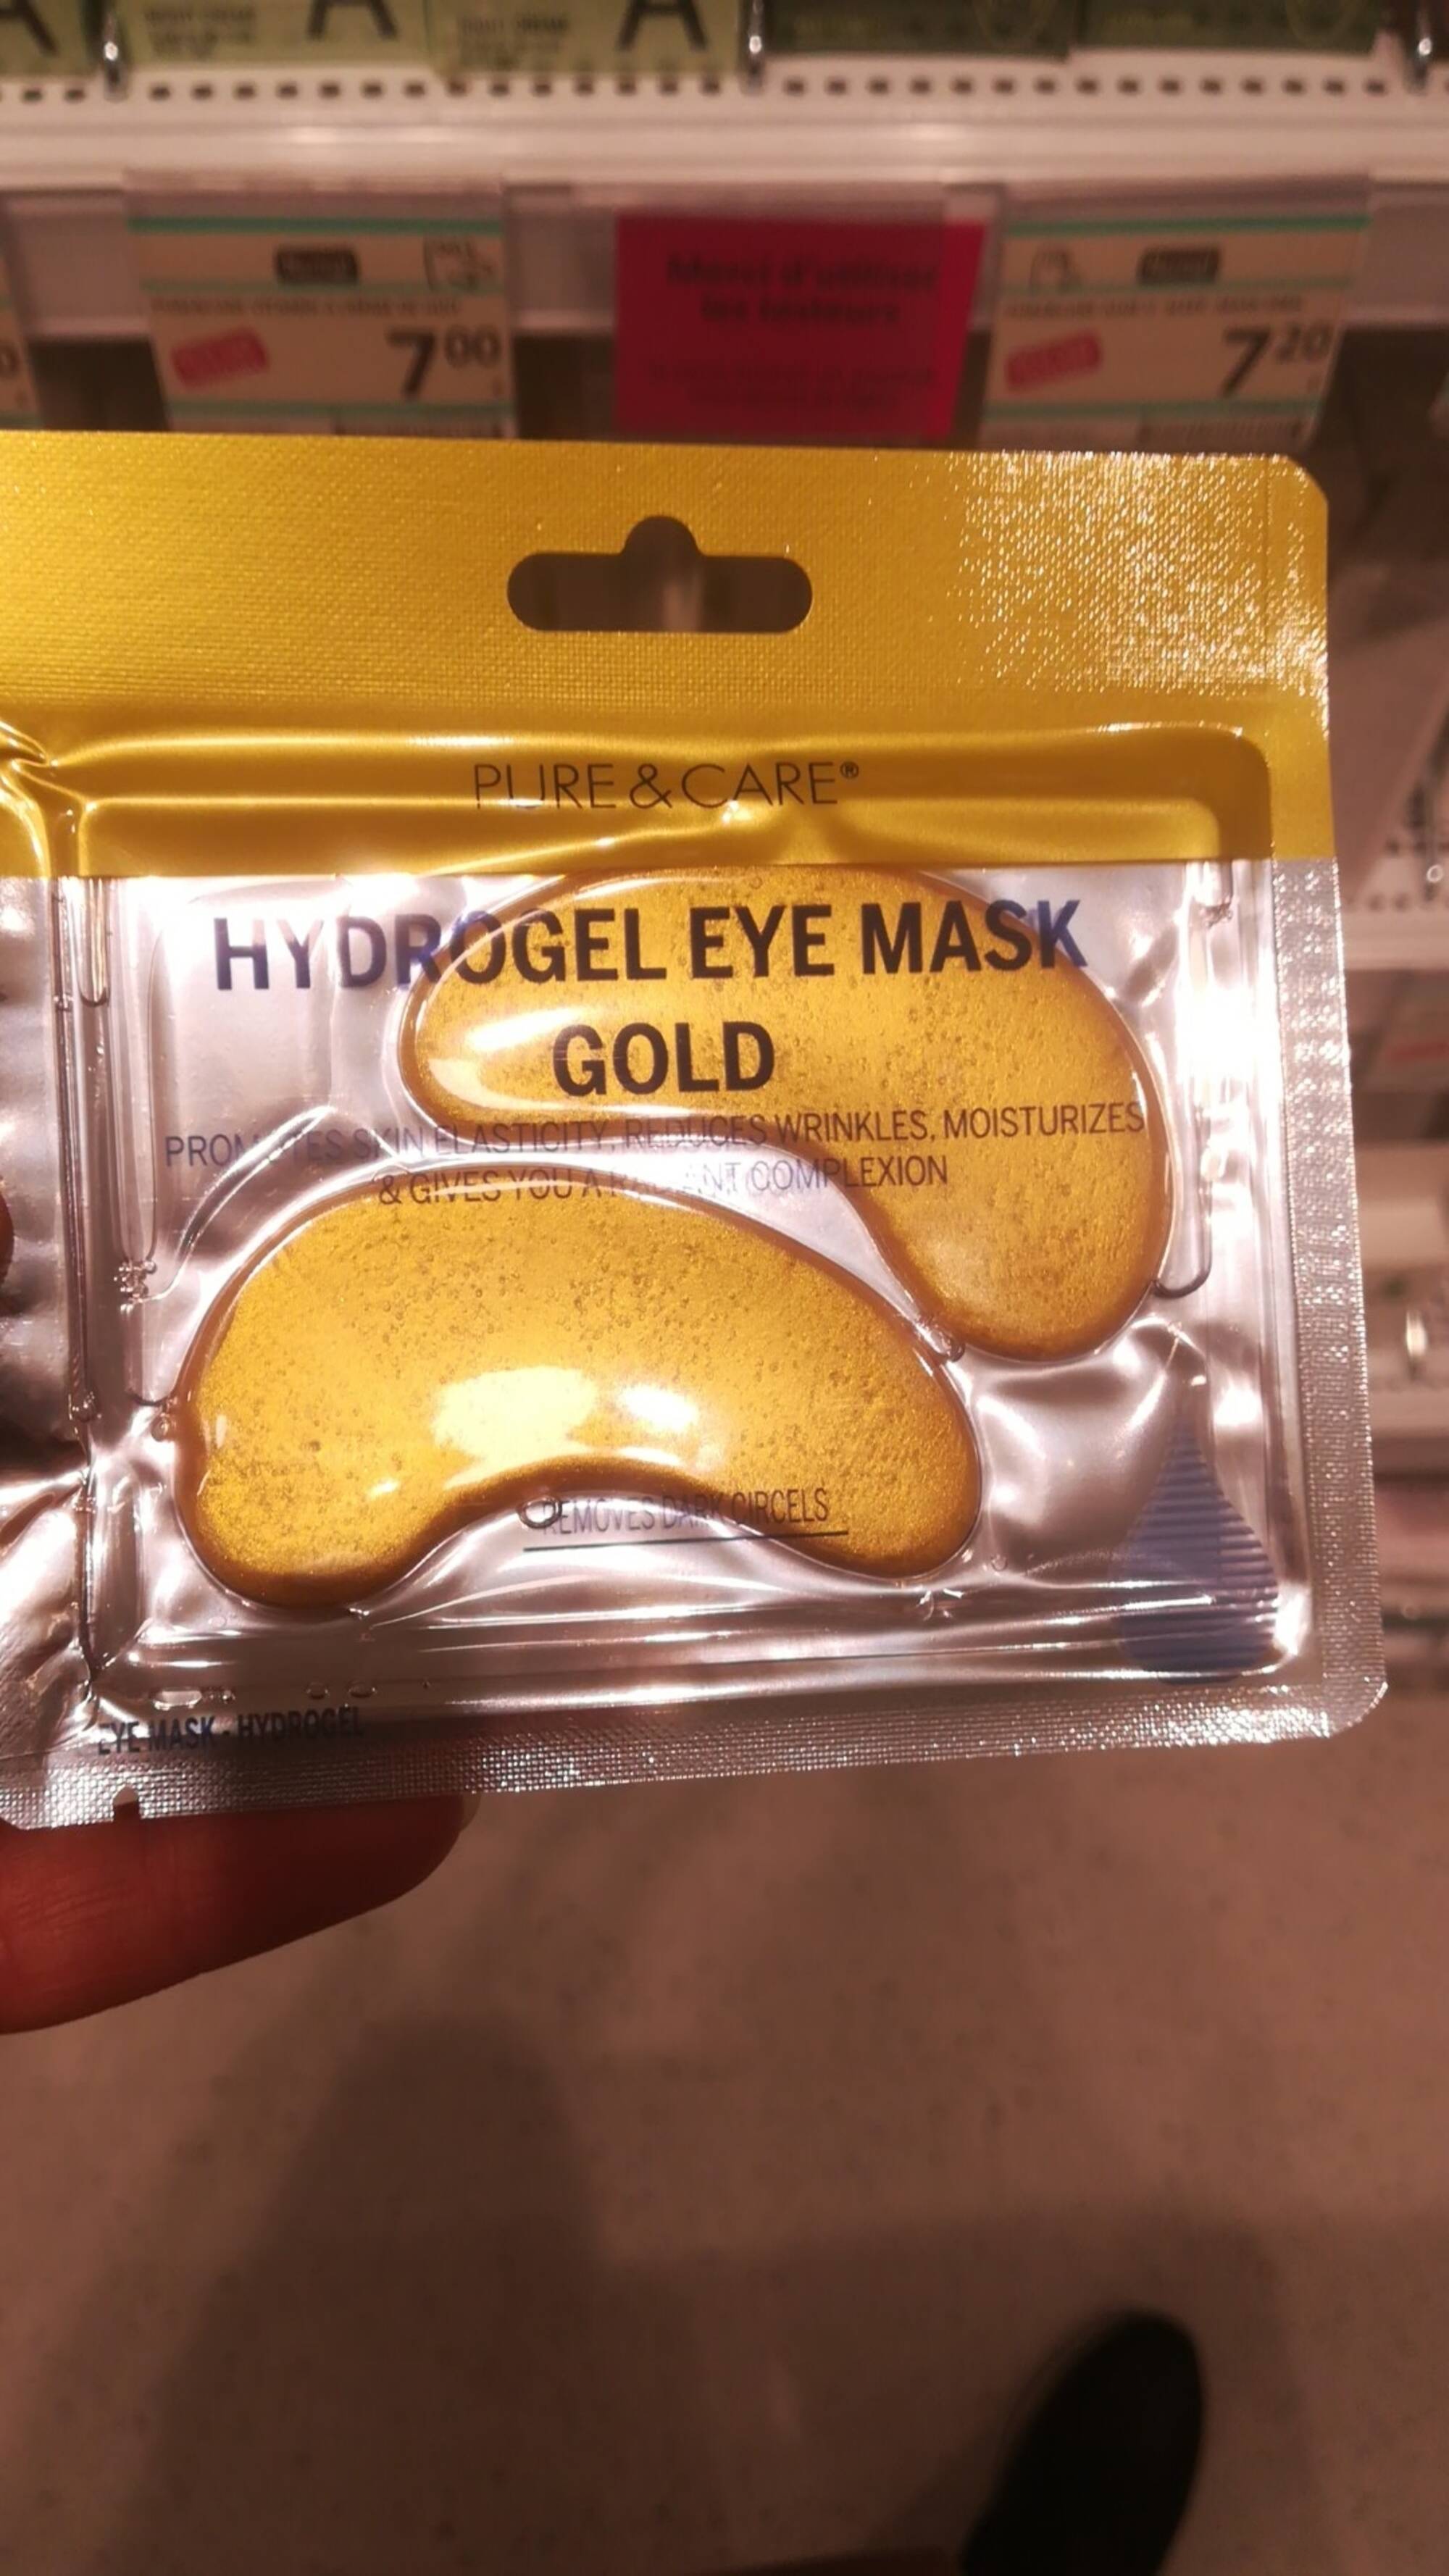 PURE & CARE - Hydrogel eye mask gold